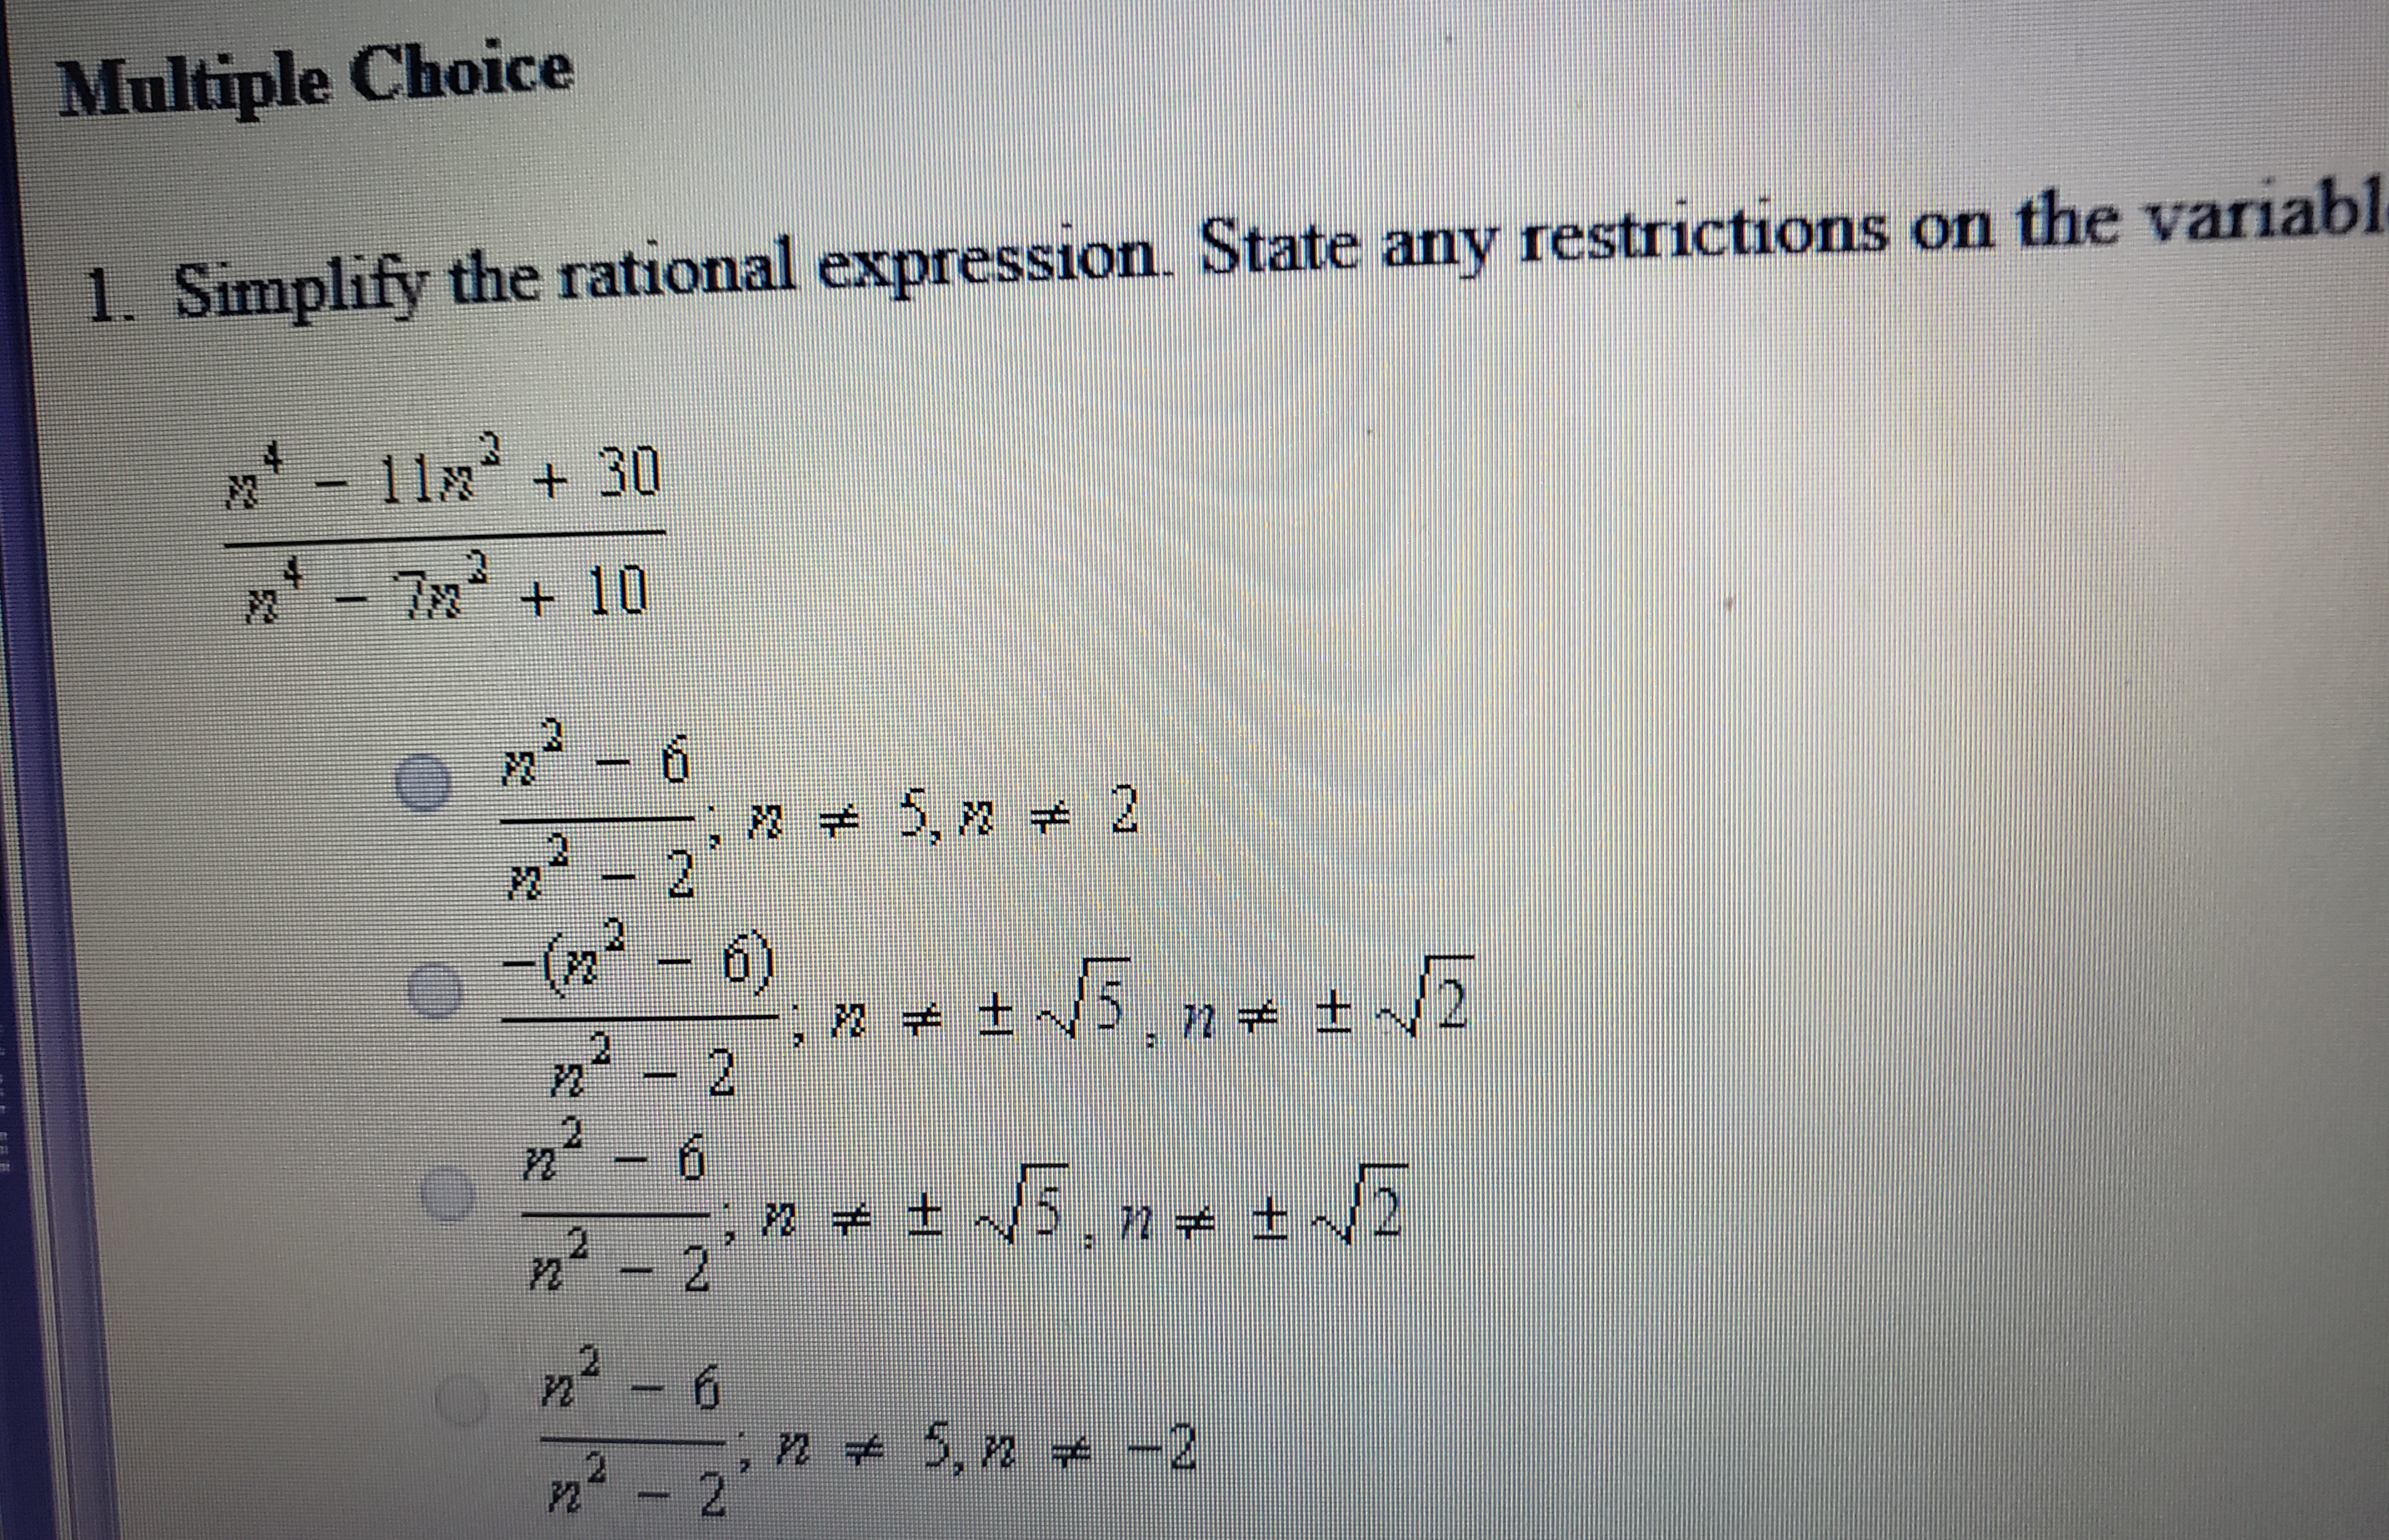 Simplify the rational expression. State any restrictions on the variab
